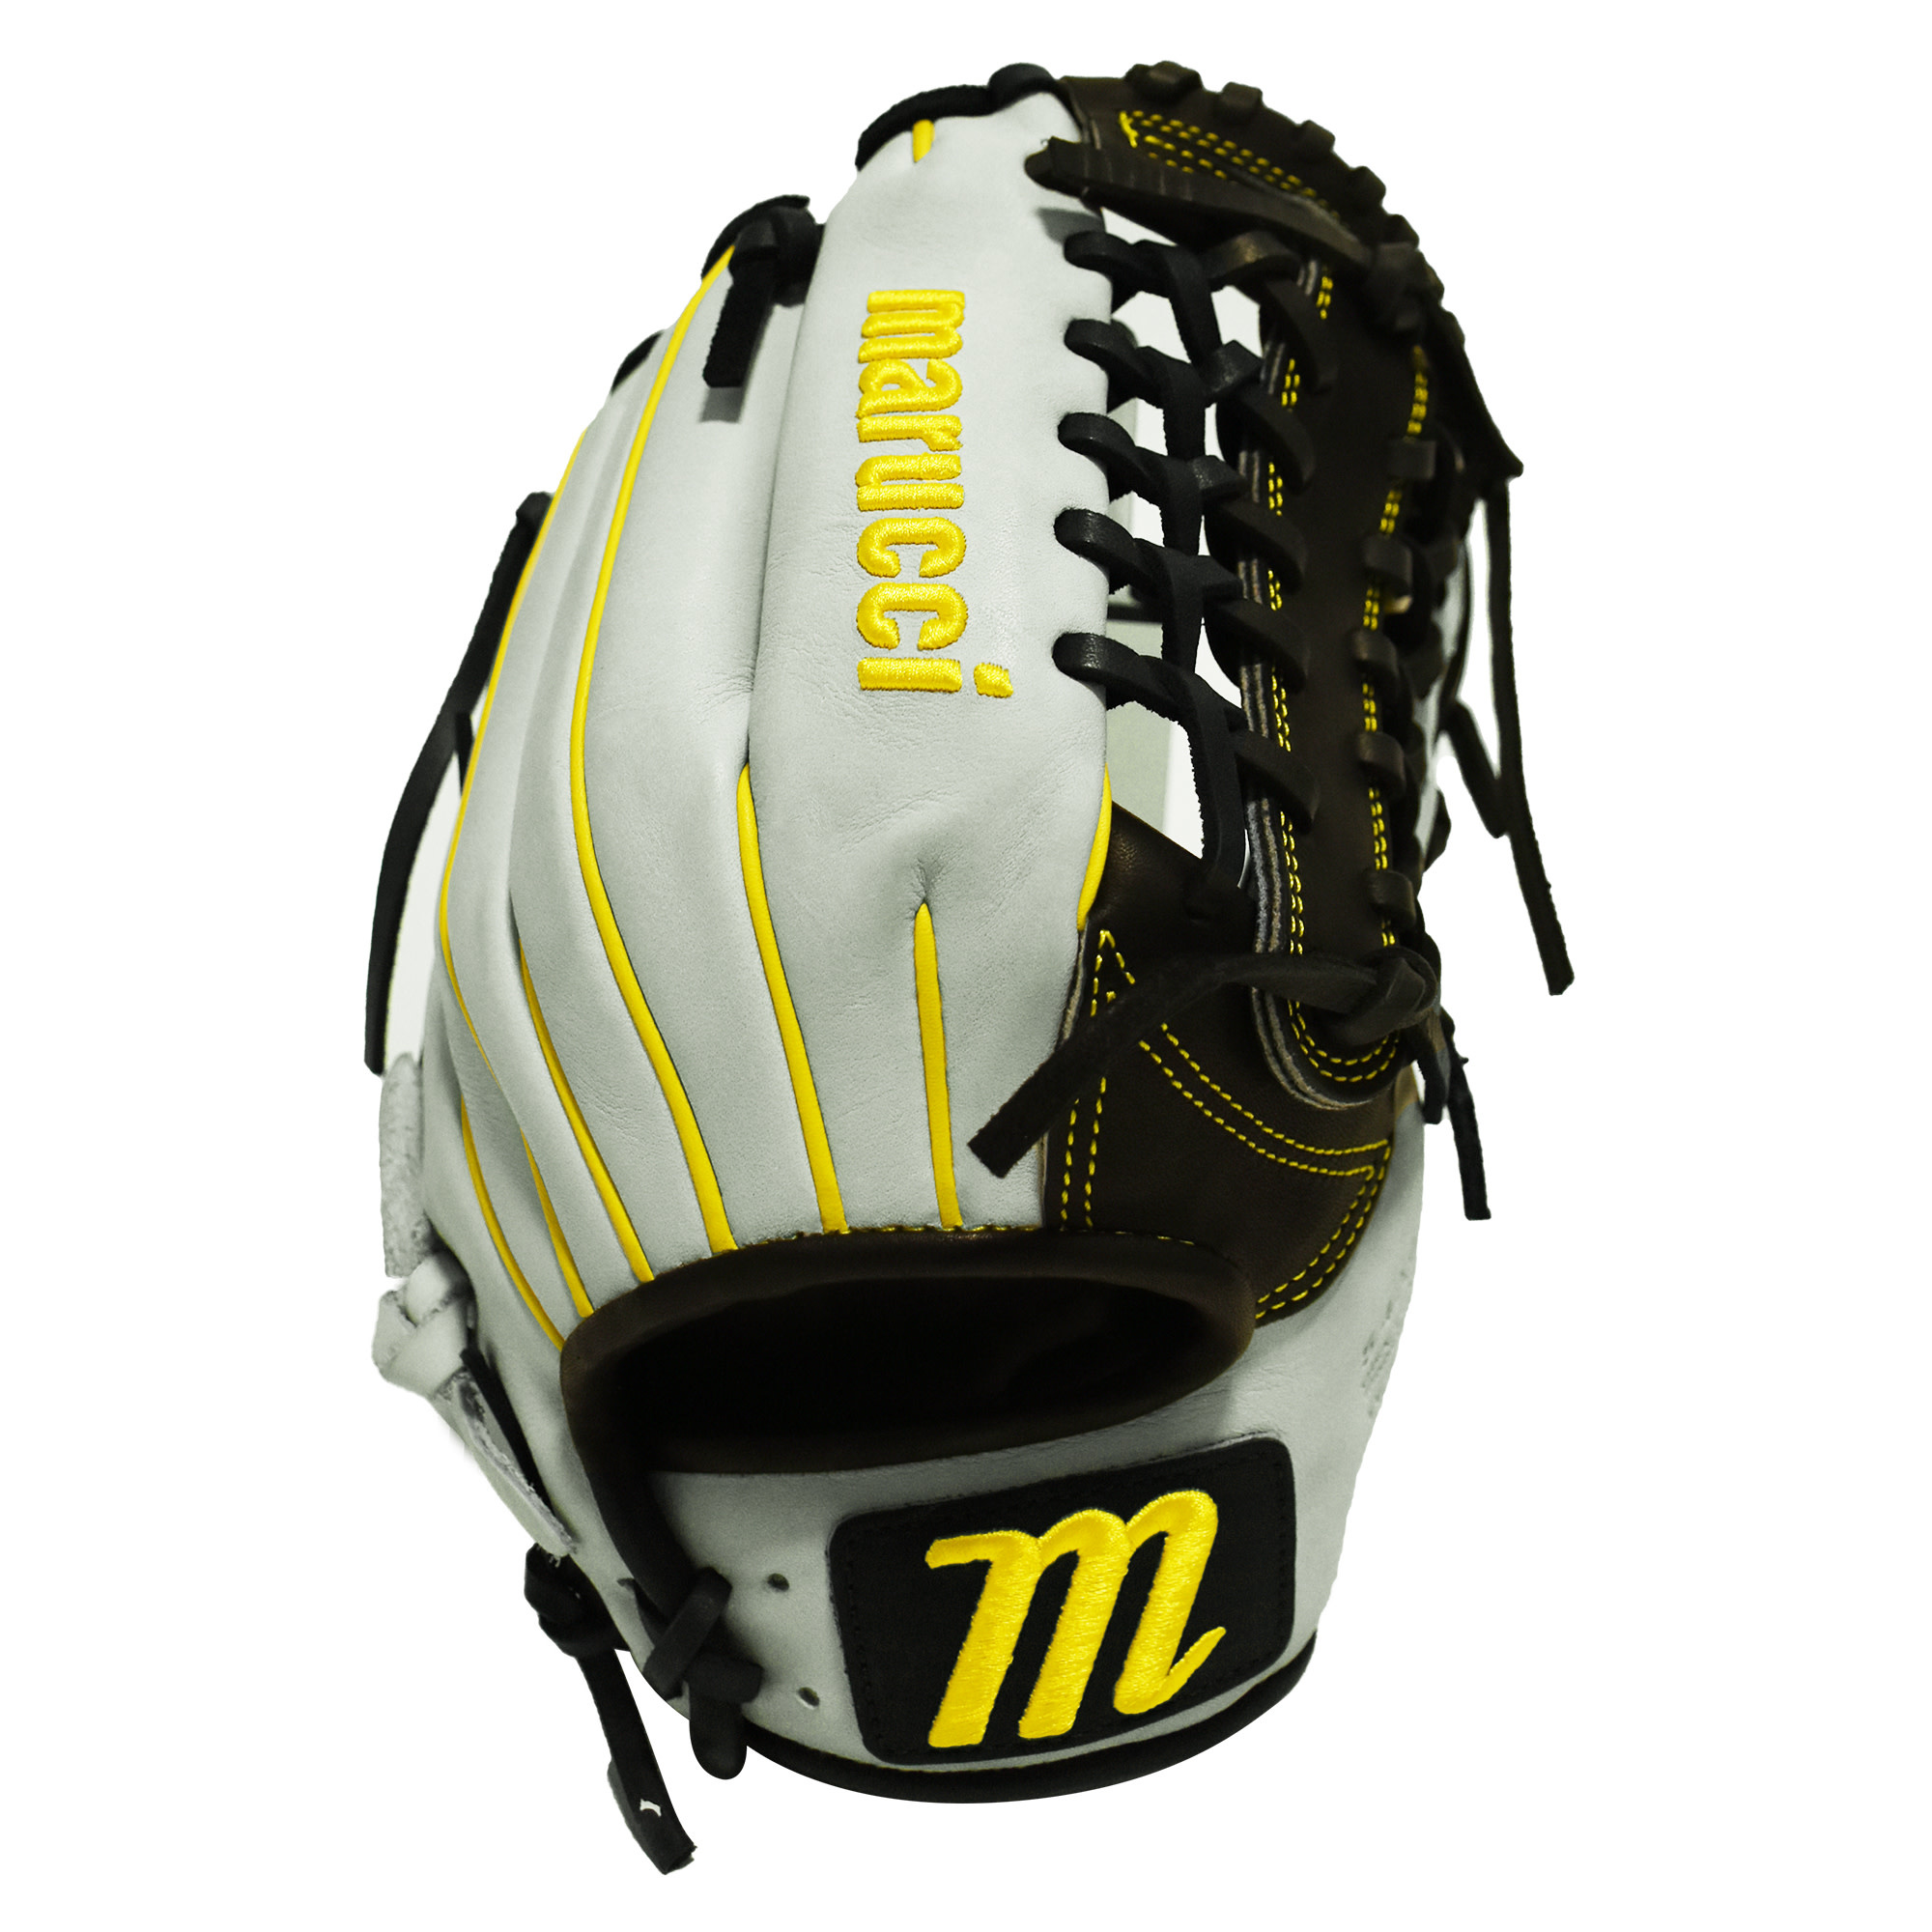 Marucci March Glove of the Month CYPRESS SERIES custom MFGCY-SMU series glove 11.75'' RHT